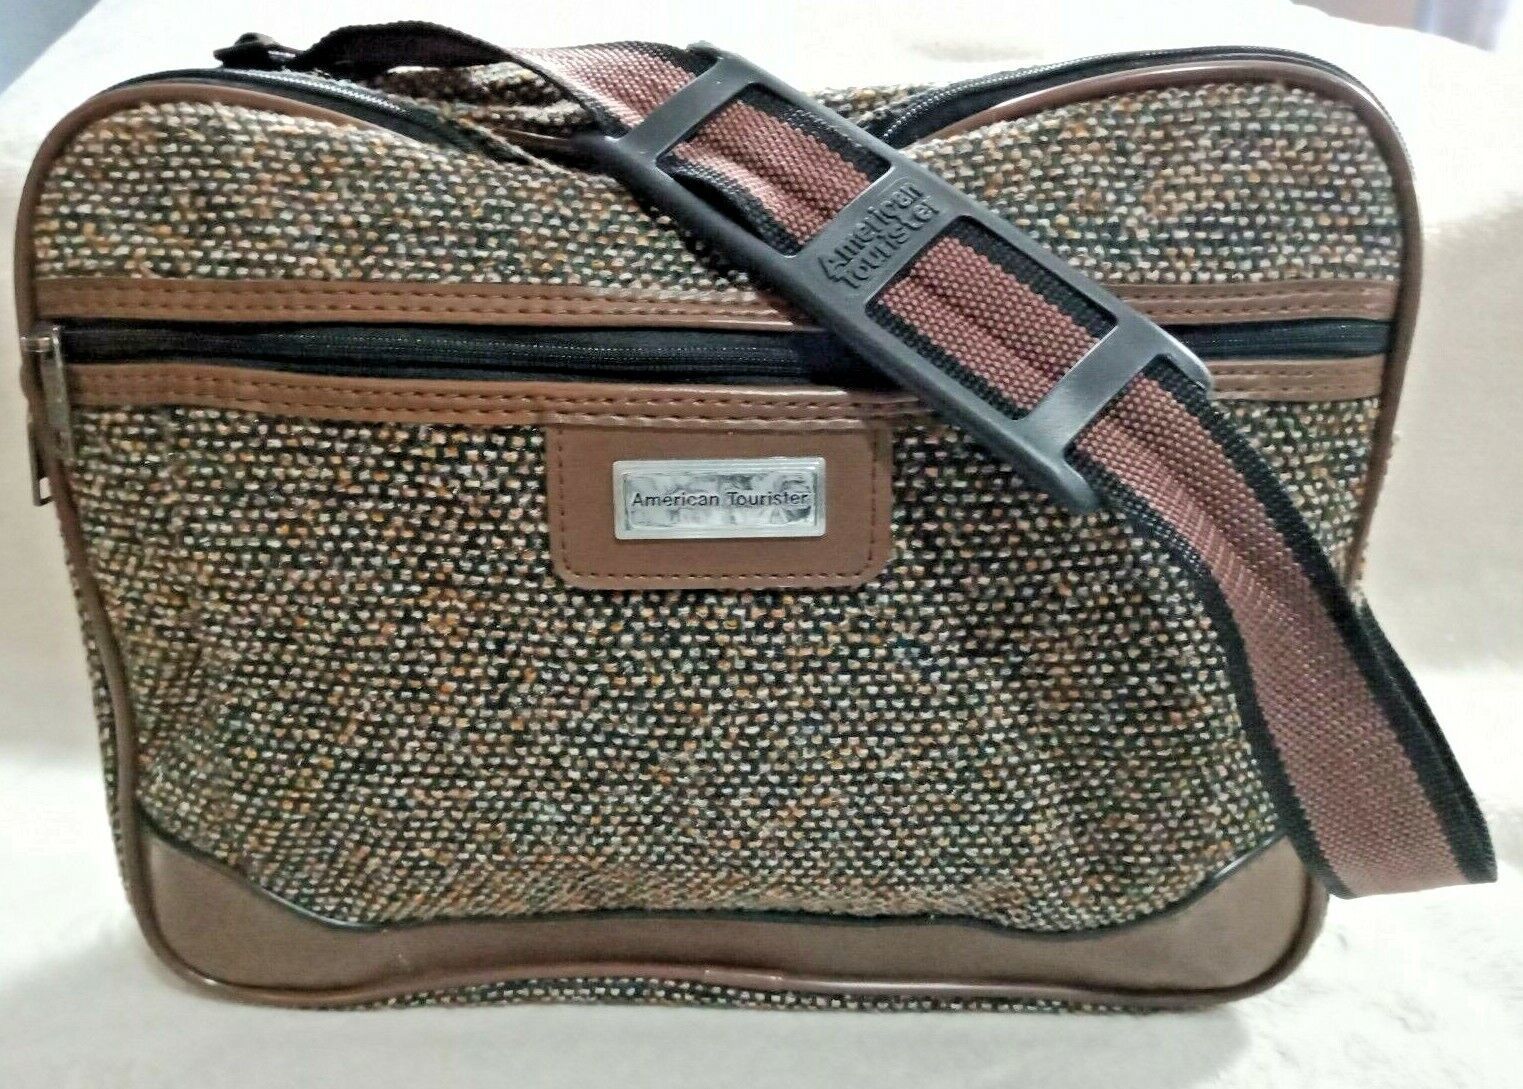 Vintage Official American Tourister Carry on Bag Luggage Brown Tweed Knit Strap - $16.28